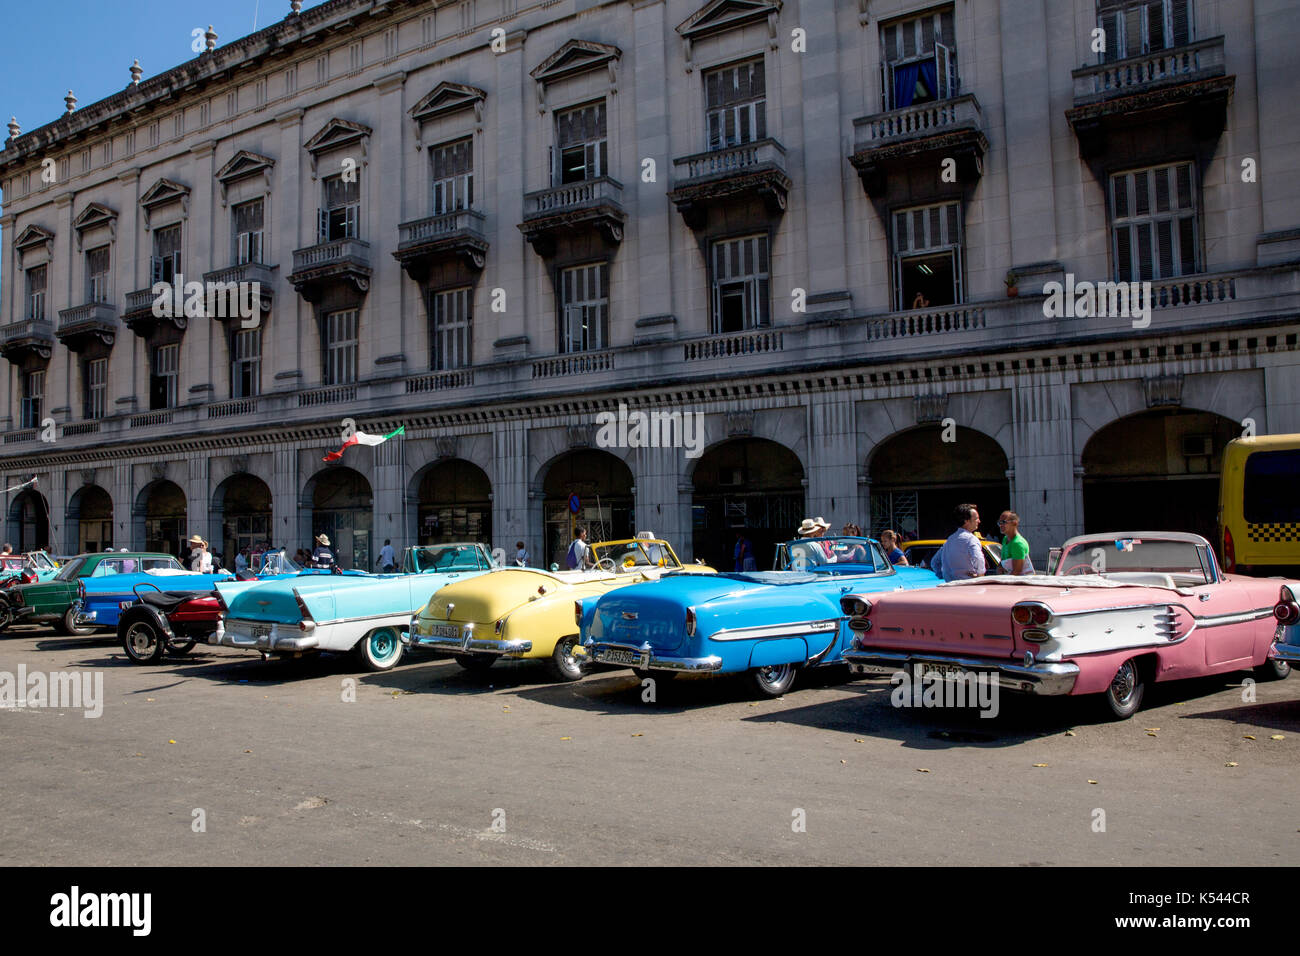 1950's cars parked on a street in the middle of Havana, Cuba in the Caribbean. Stock Photo